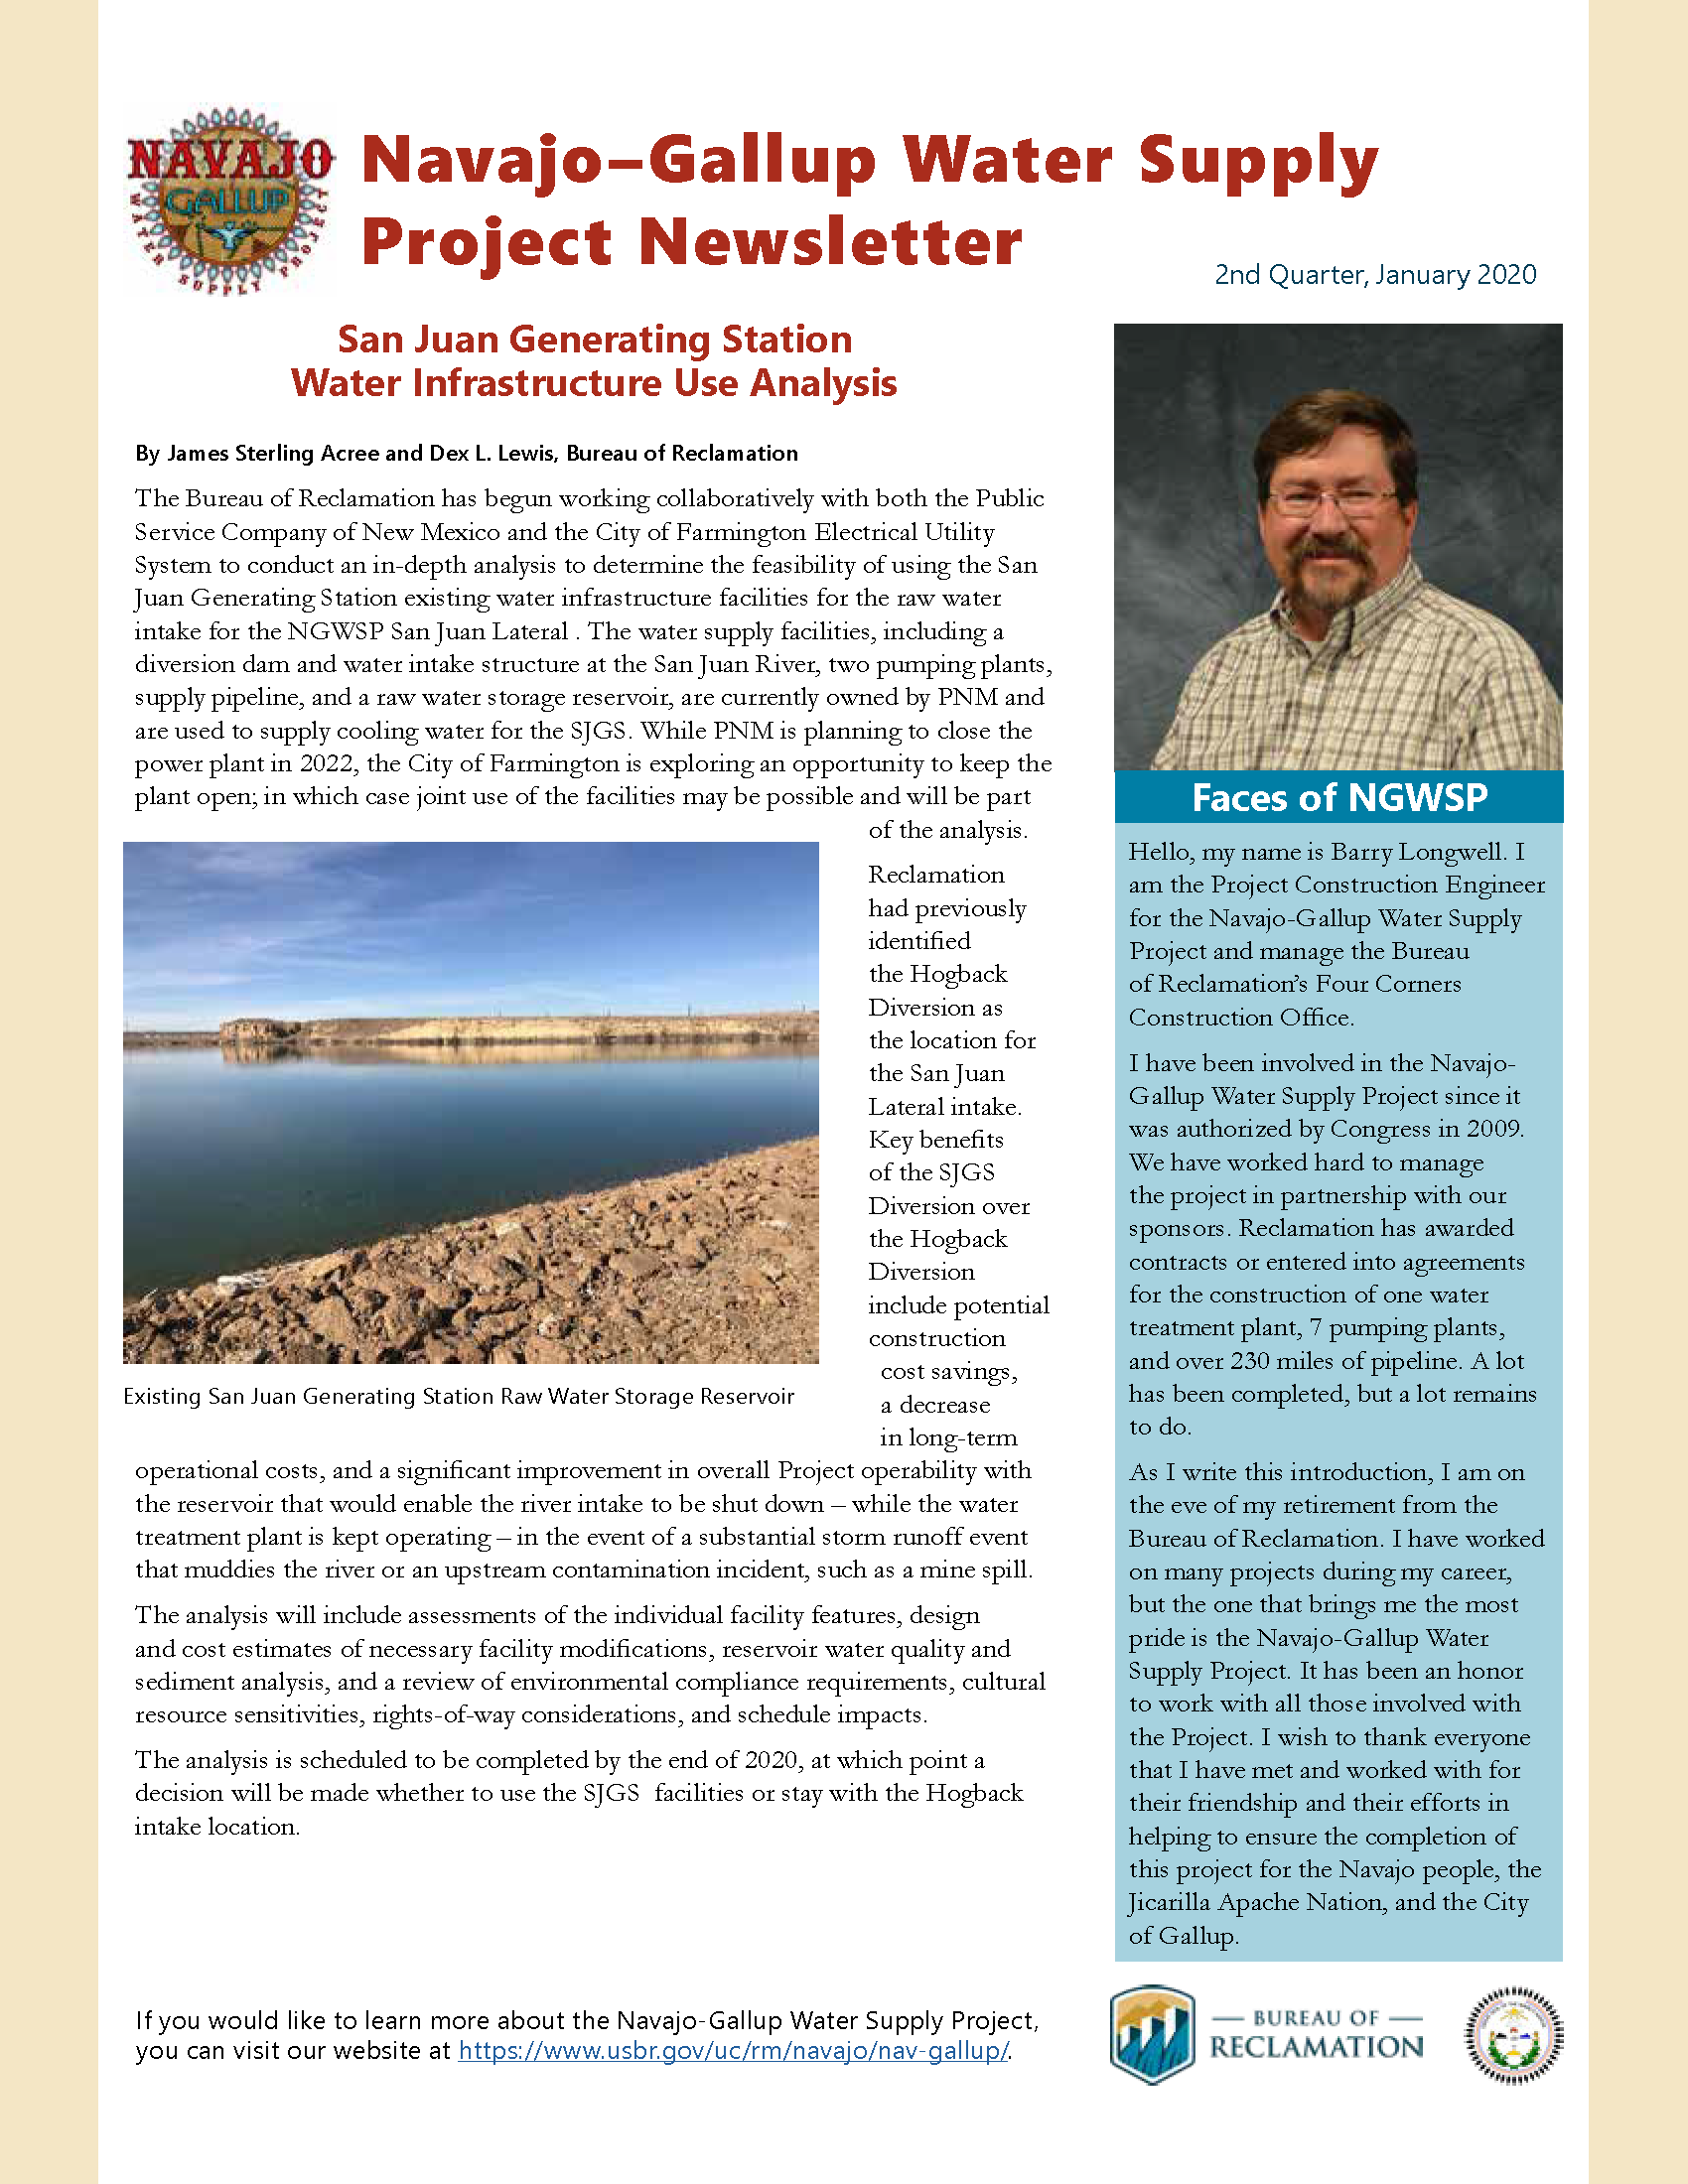 Navajo-Gallup Water Supply Project Newsletter